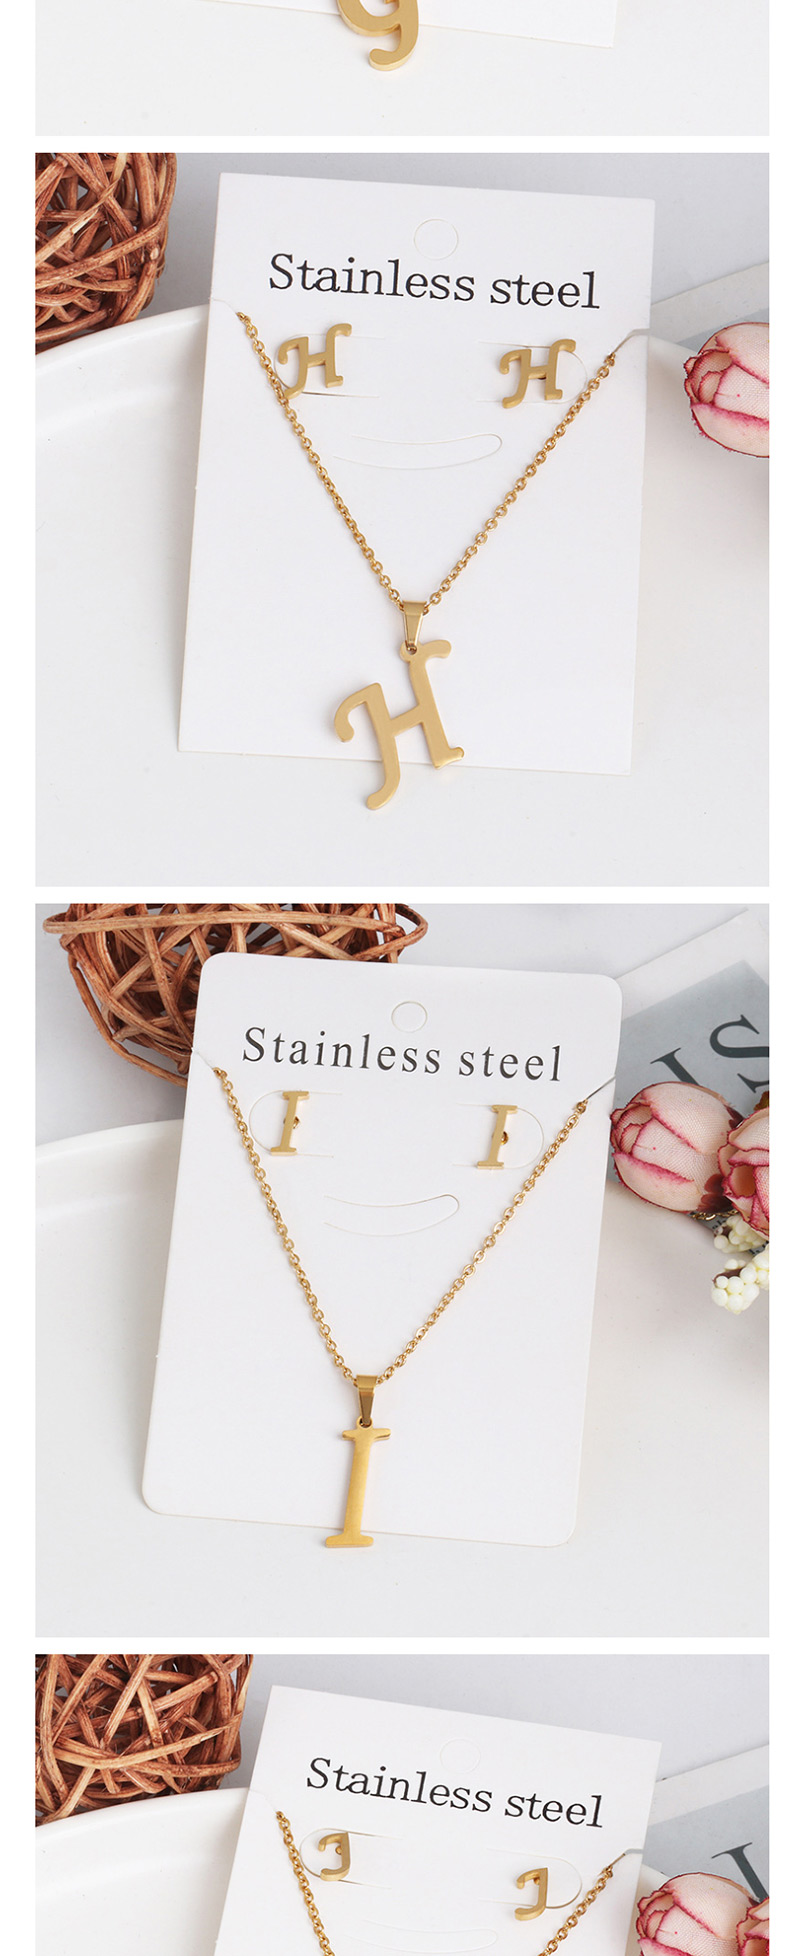 Fashion M Gold Stainless Steel Letter Necklace Earrings Two-piece,Jewelry Sets